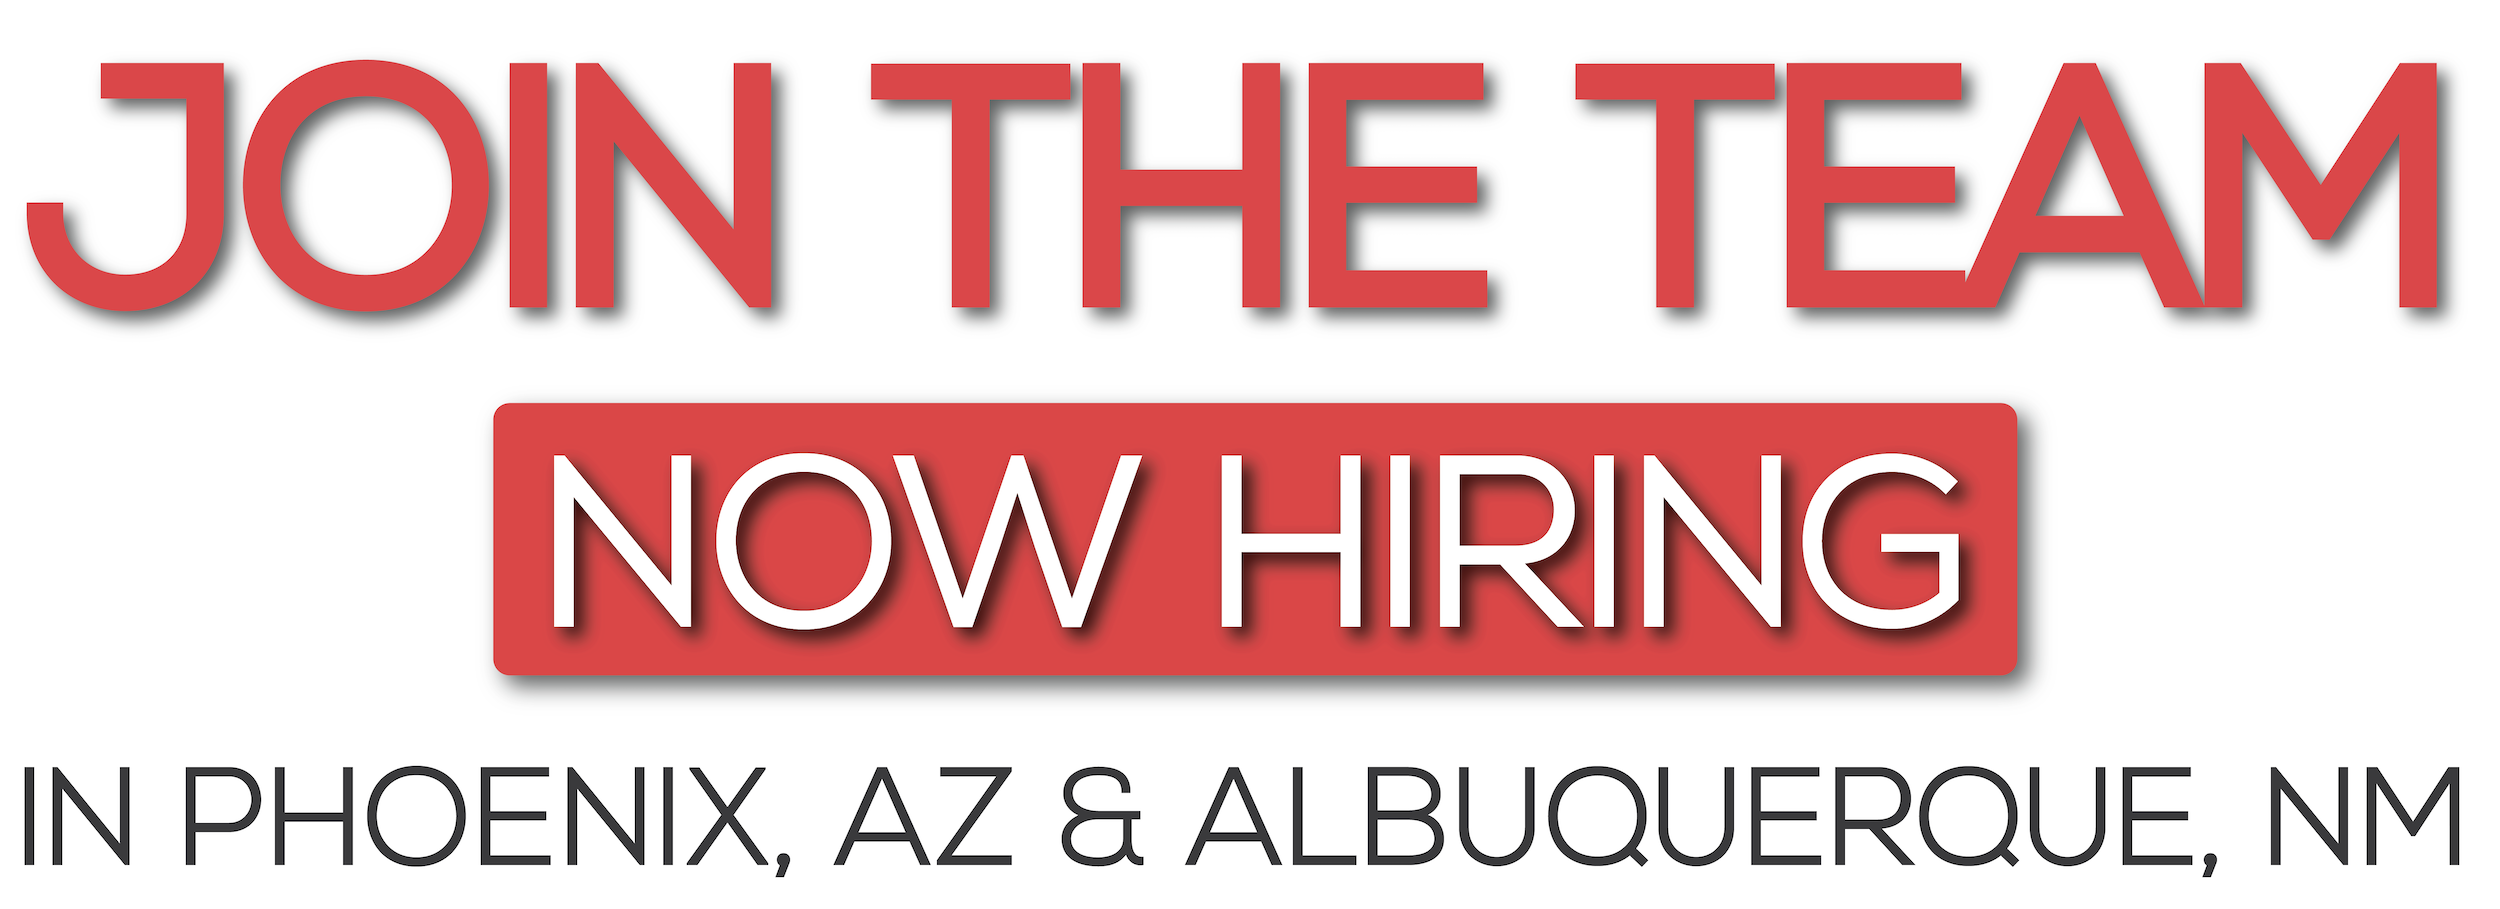 Join the team at Rainbow Ryders Hot Air Balloon Company. Now hiring in Phoenix and Albuquerque. 